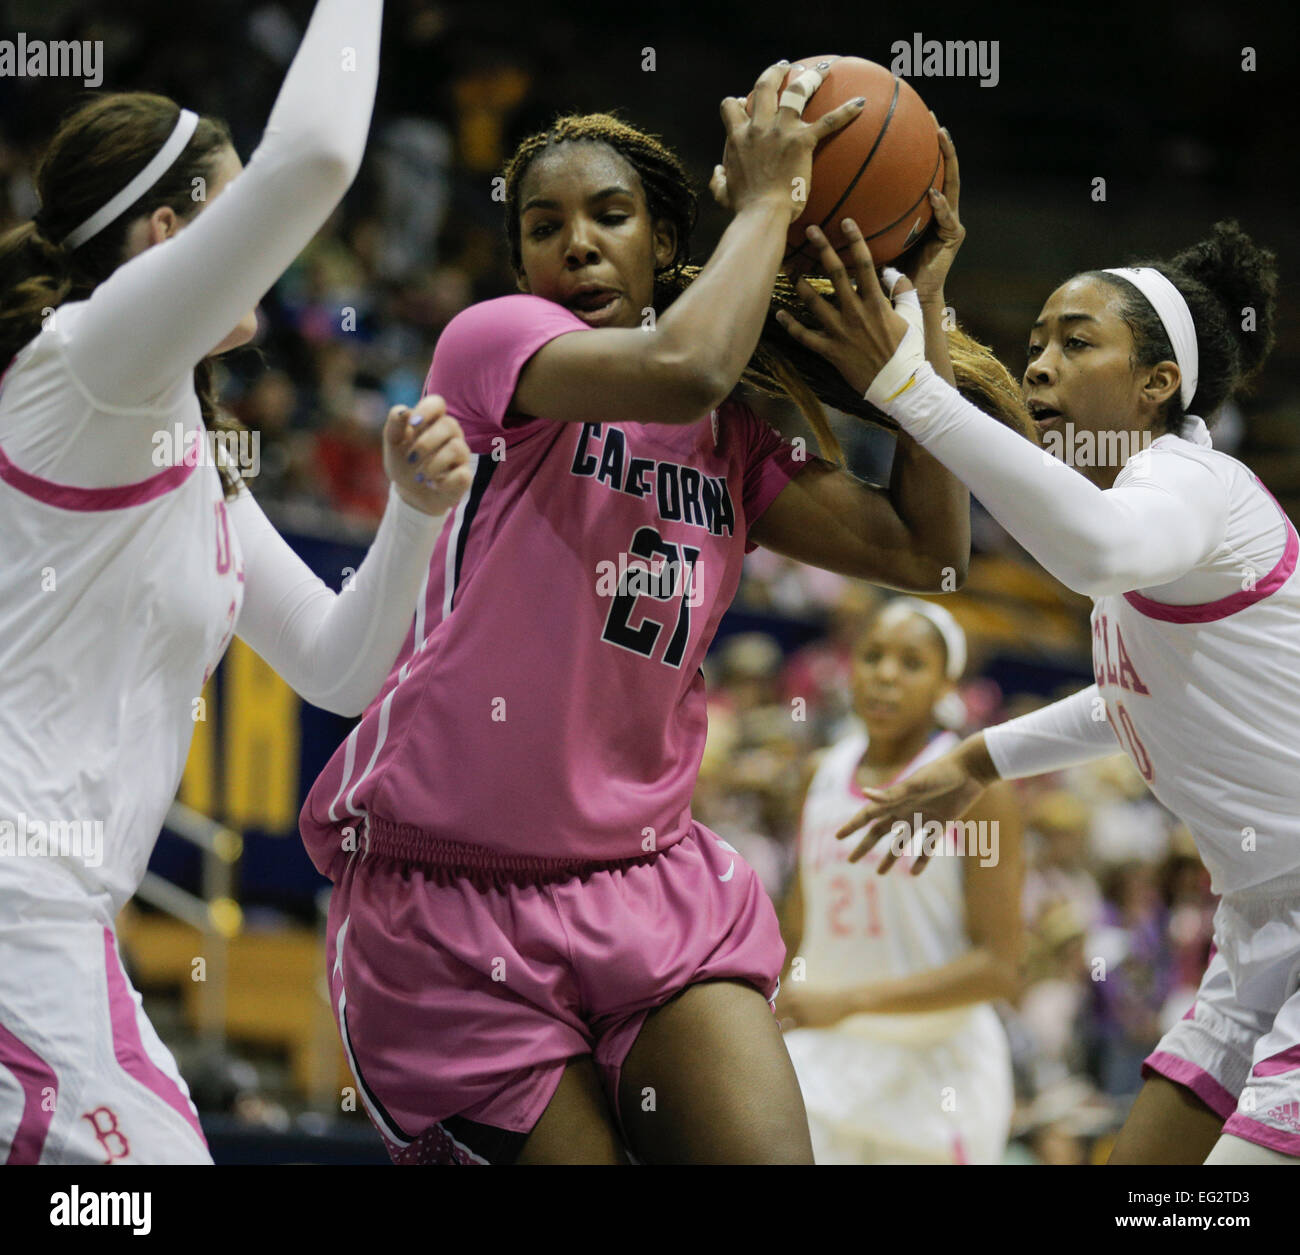 Berkeley CA. 12th Feb, 2015. California F # 21 Reshanda gray in the paint drive to the hoop and score during NCAA Women's Basketball game between UCLA Bruins and California Golden Bears 70-64 win at Hass Pavilion Berkeley Calif. © csm/Alamy Live News Stock Photo